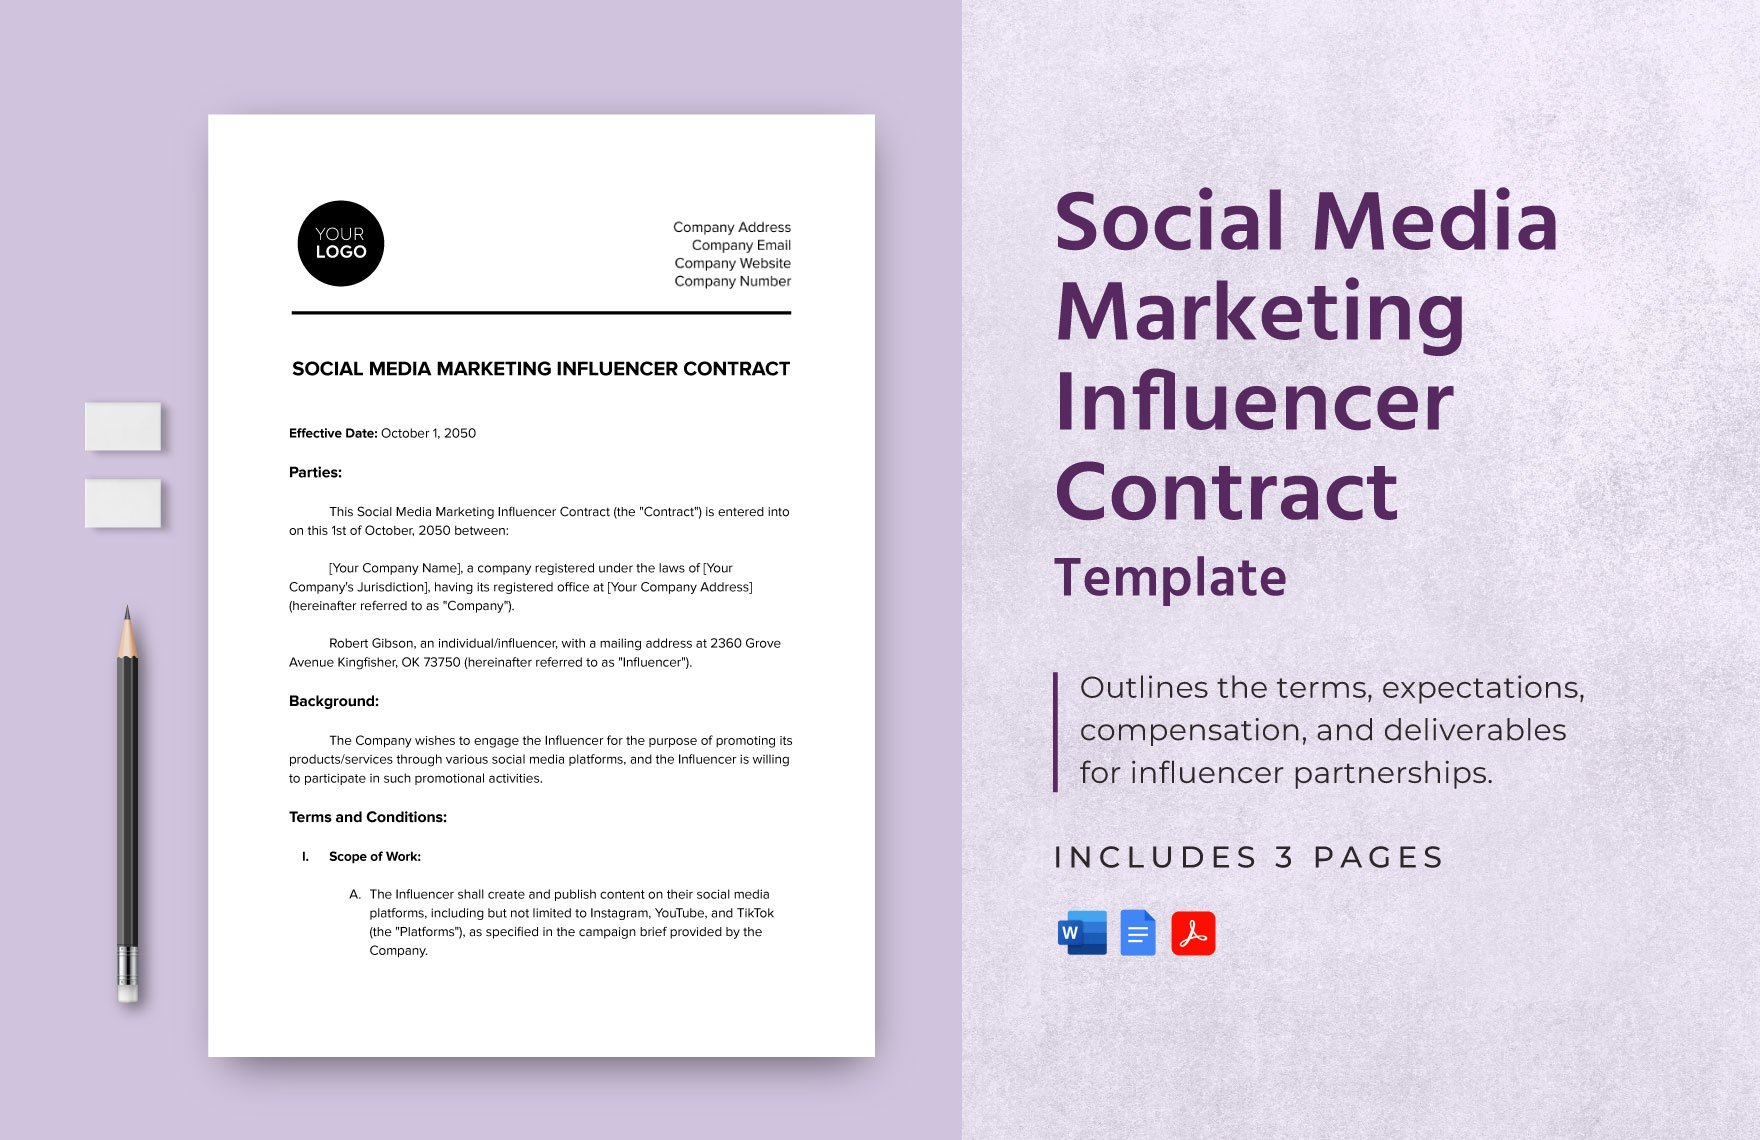 Social Media Marketing Influencer Contract Template in Word, Google Docs, PDF